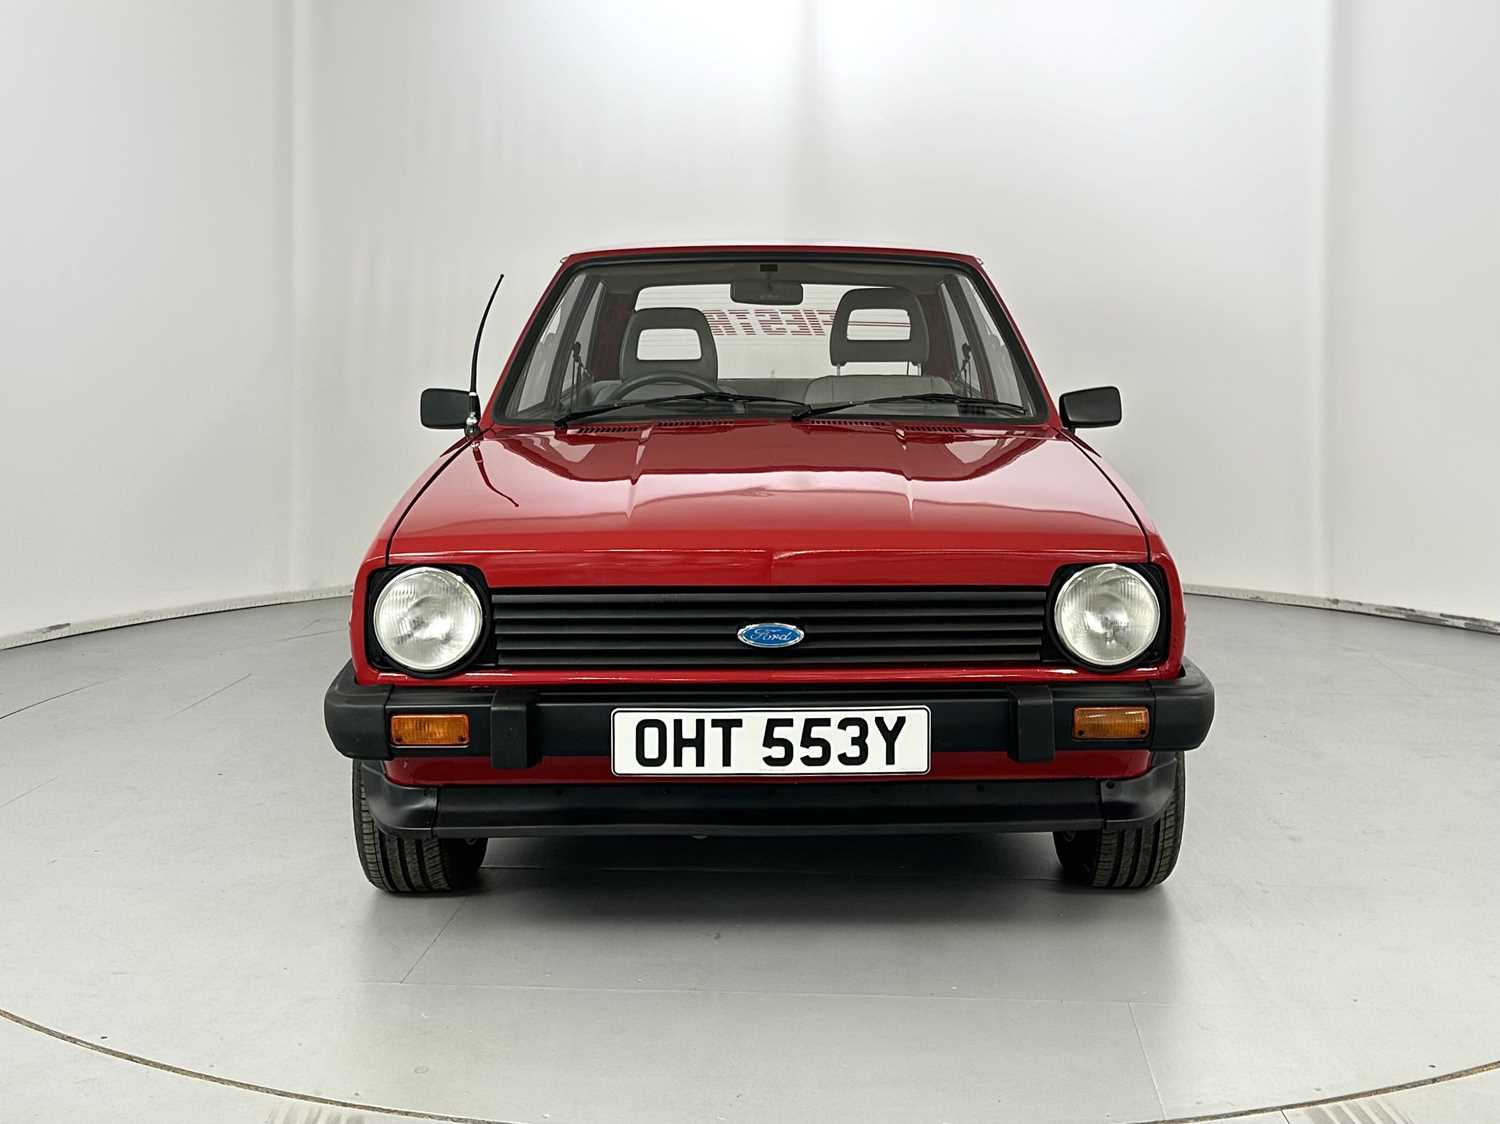 1983 Ford Fiesta - Image 2 of 31